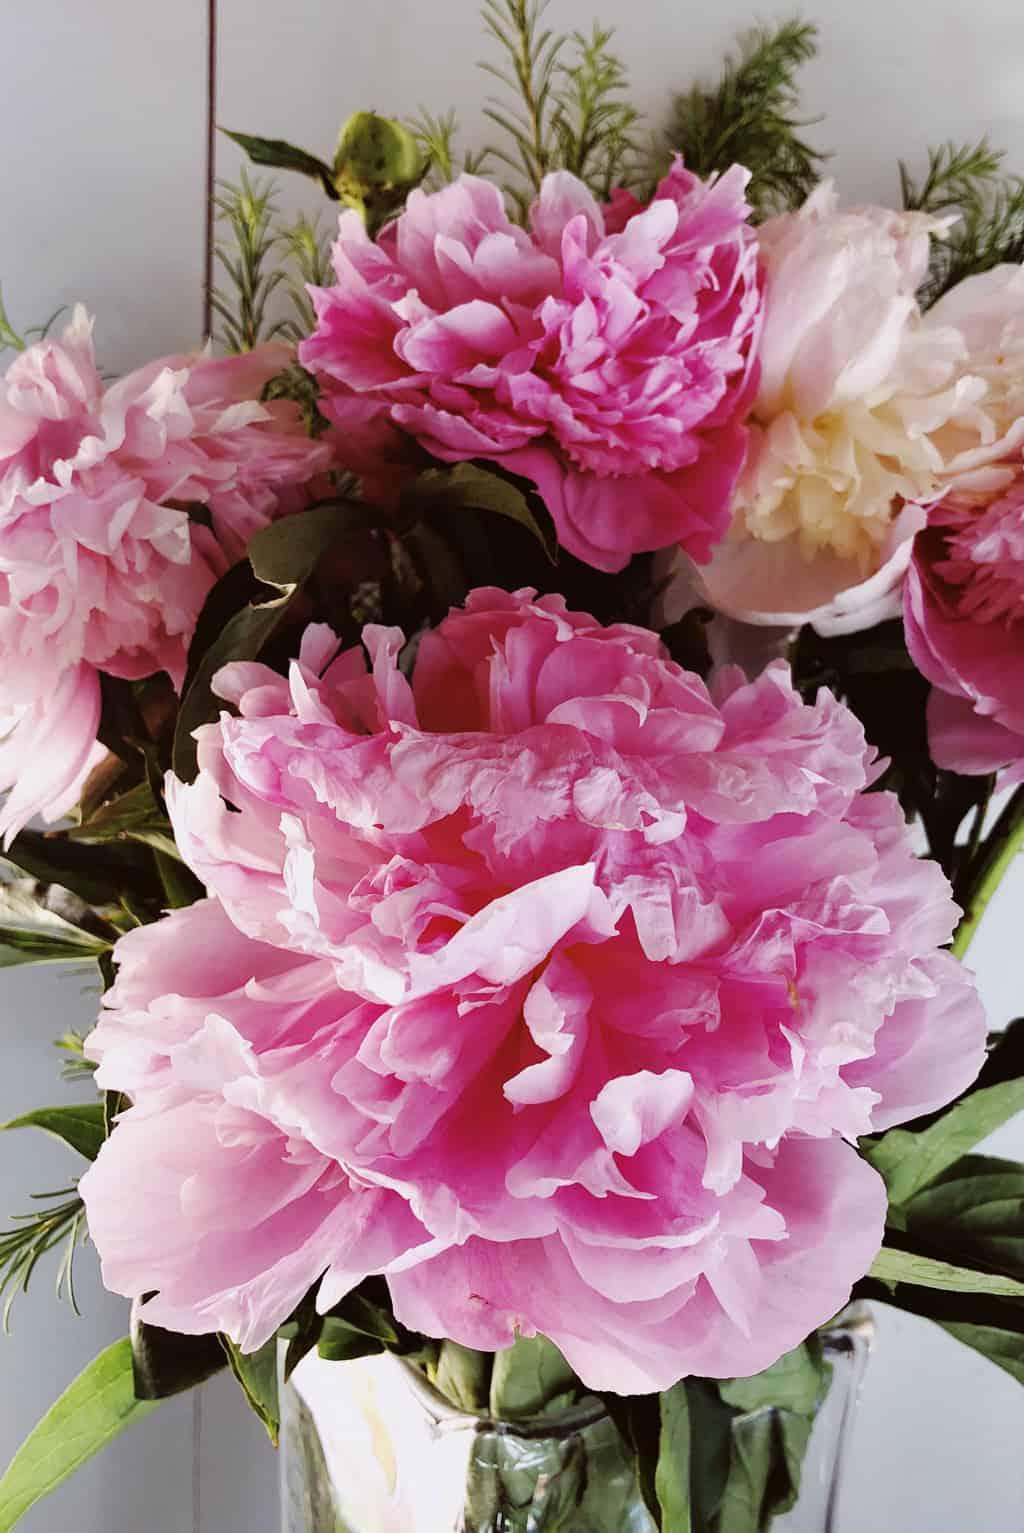 How to Cut and Preserve Fresh Peonies!